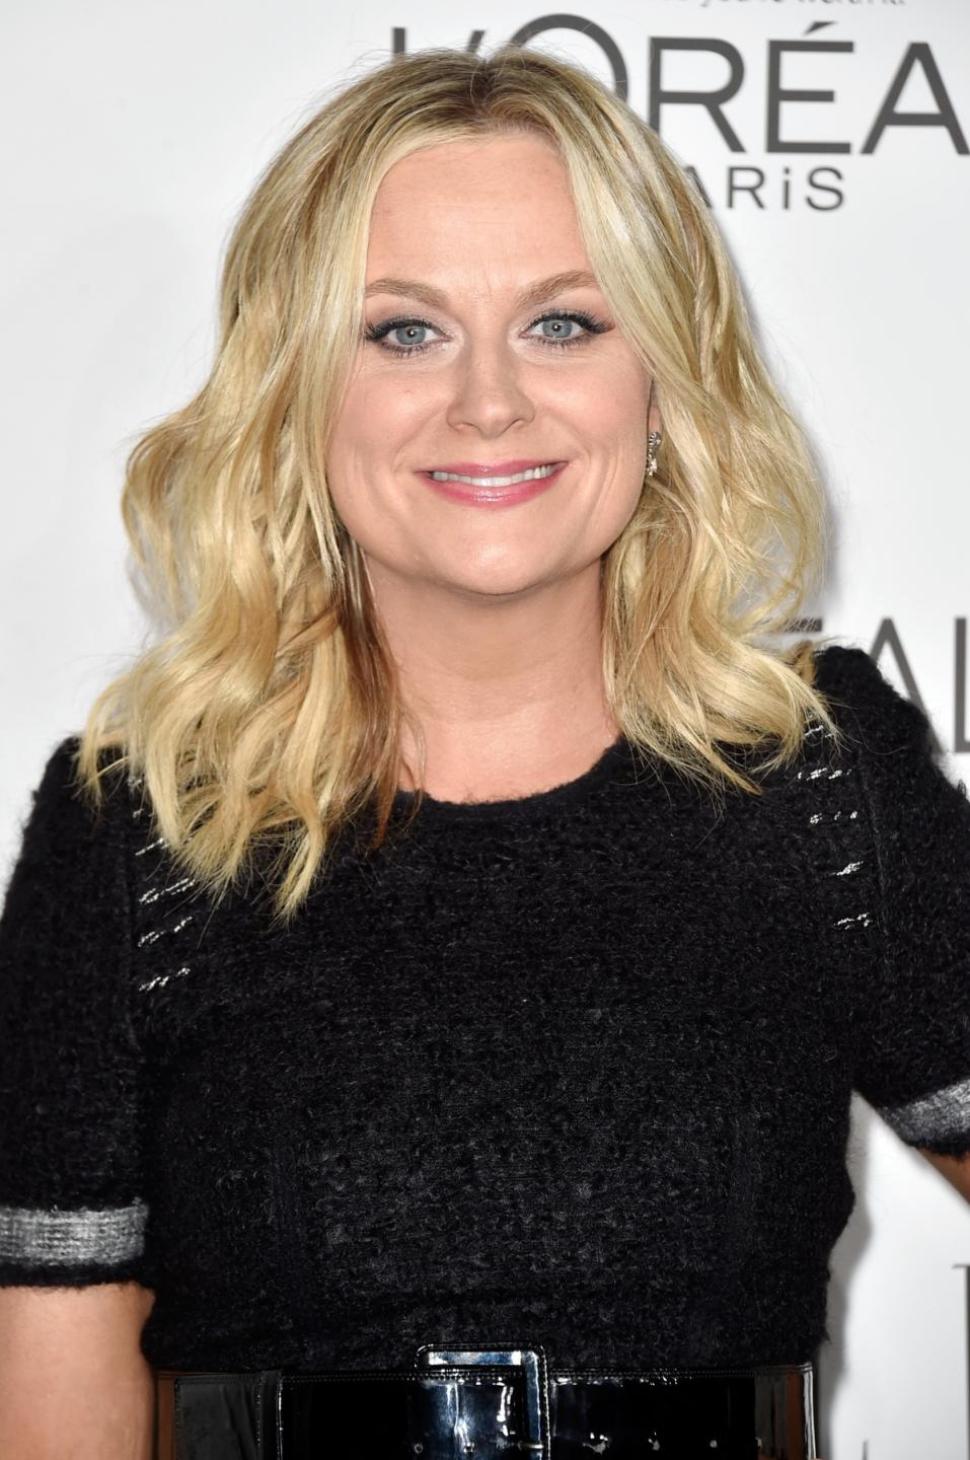 Actress Amy Poehler says "Your career is a bad boyfriend."